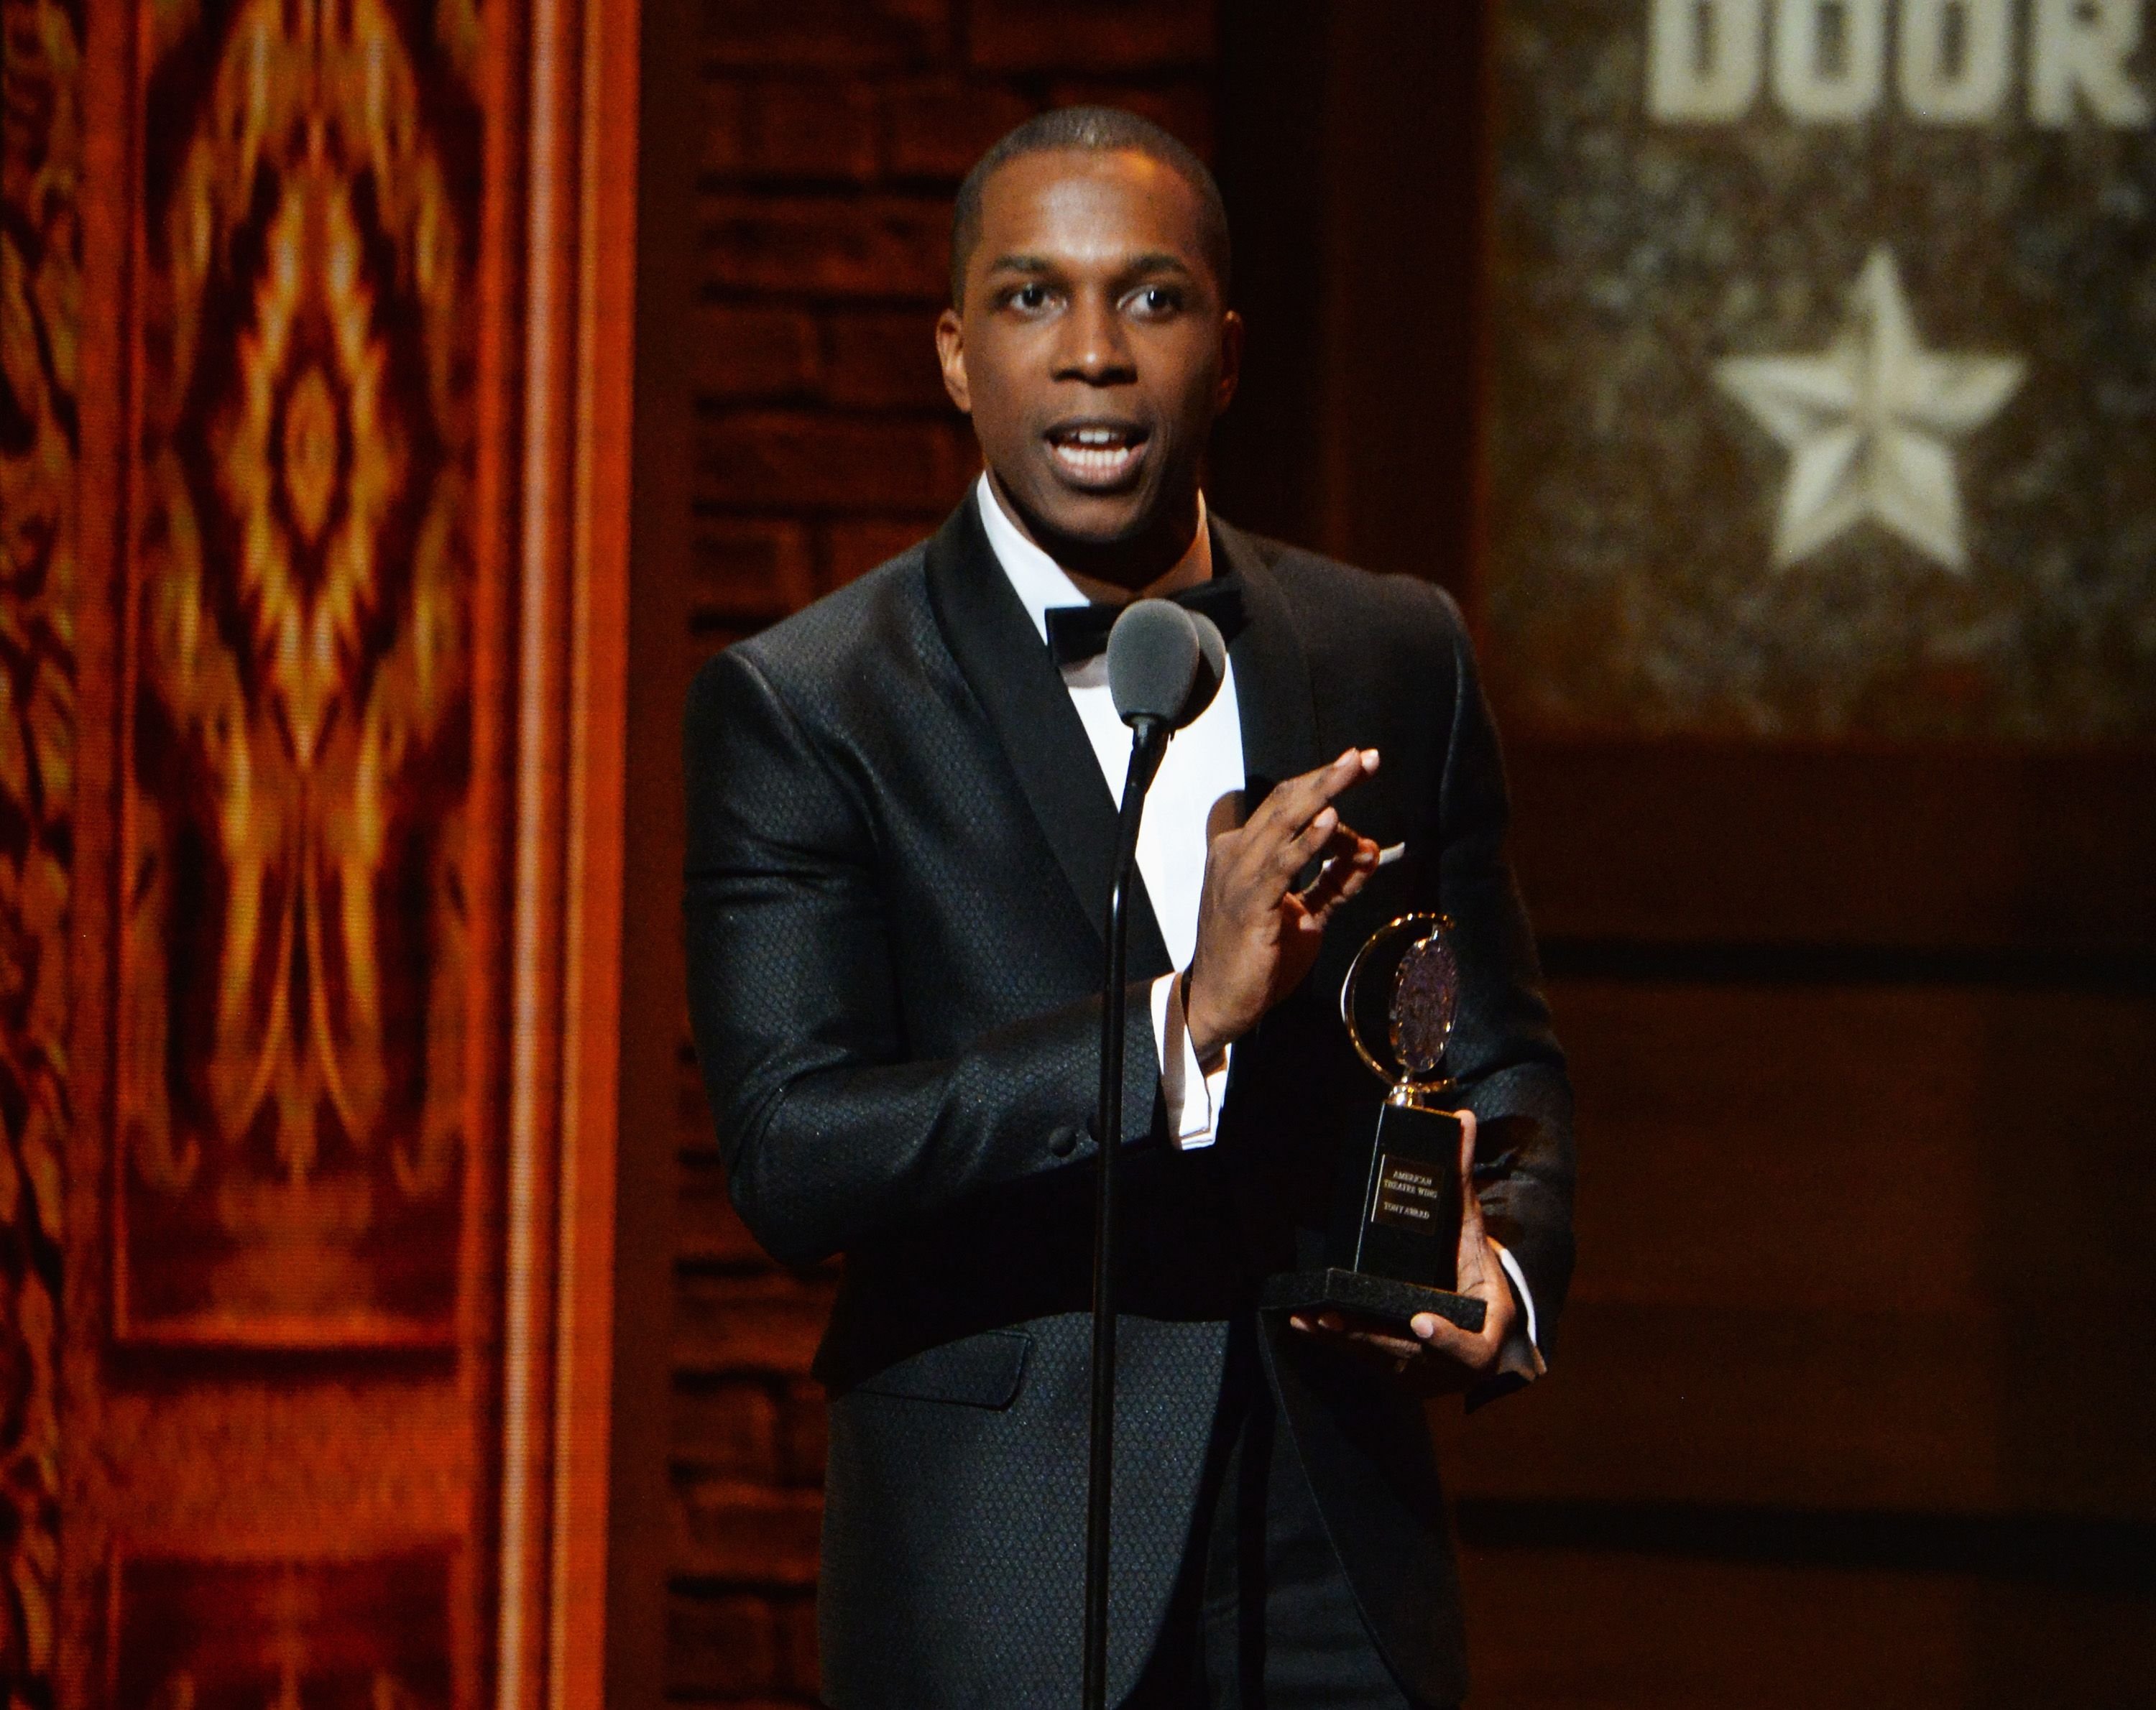 Leslie Odom Jr. during the awarding for Best Performance by an Actor in a Leading Role in a Musical in "Hamilton" onstage during the 70th Annual Tony Awards at The Beacon Theatre on June 12, 2016 in New York City. | Source: Getty Images